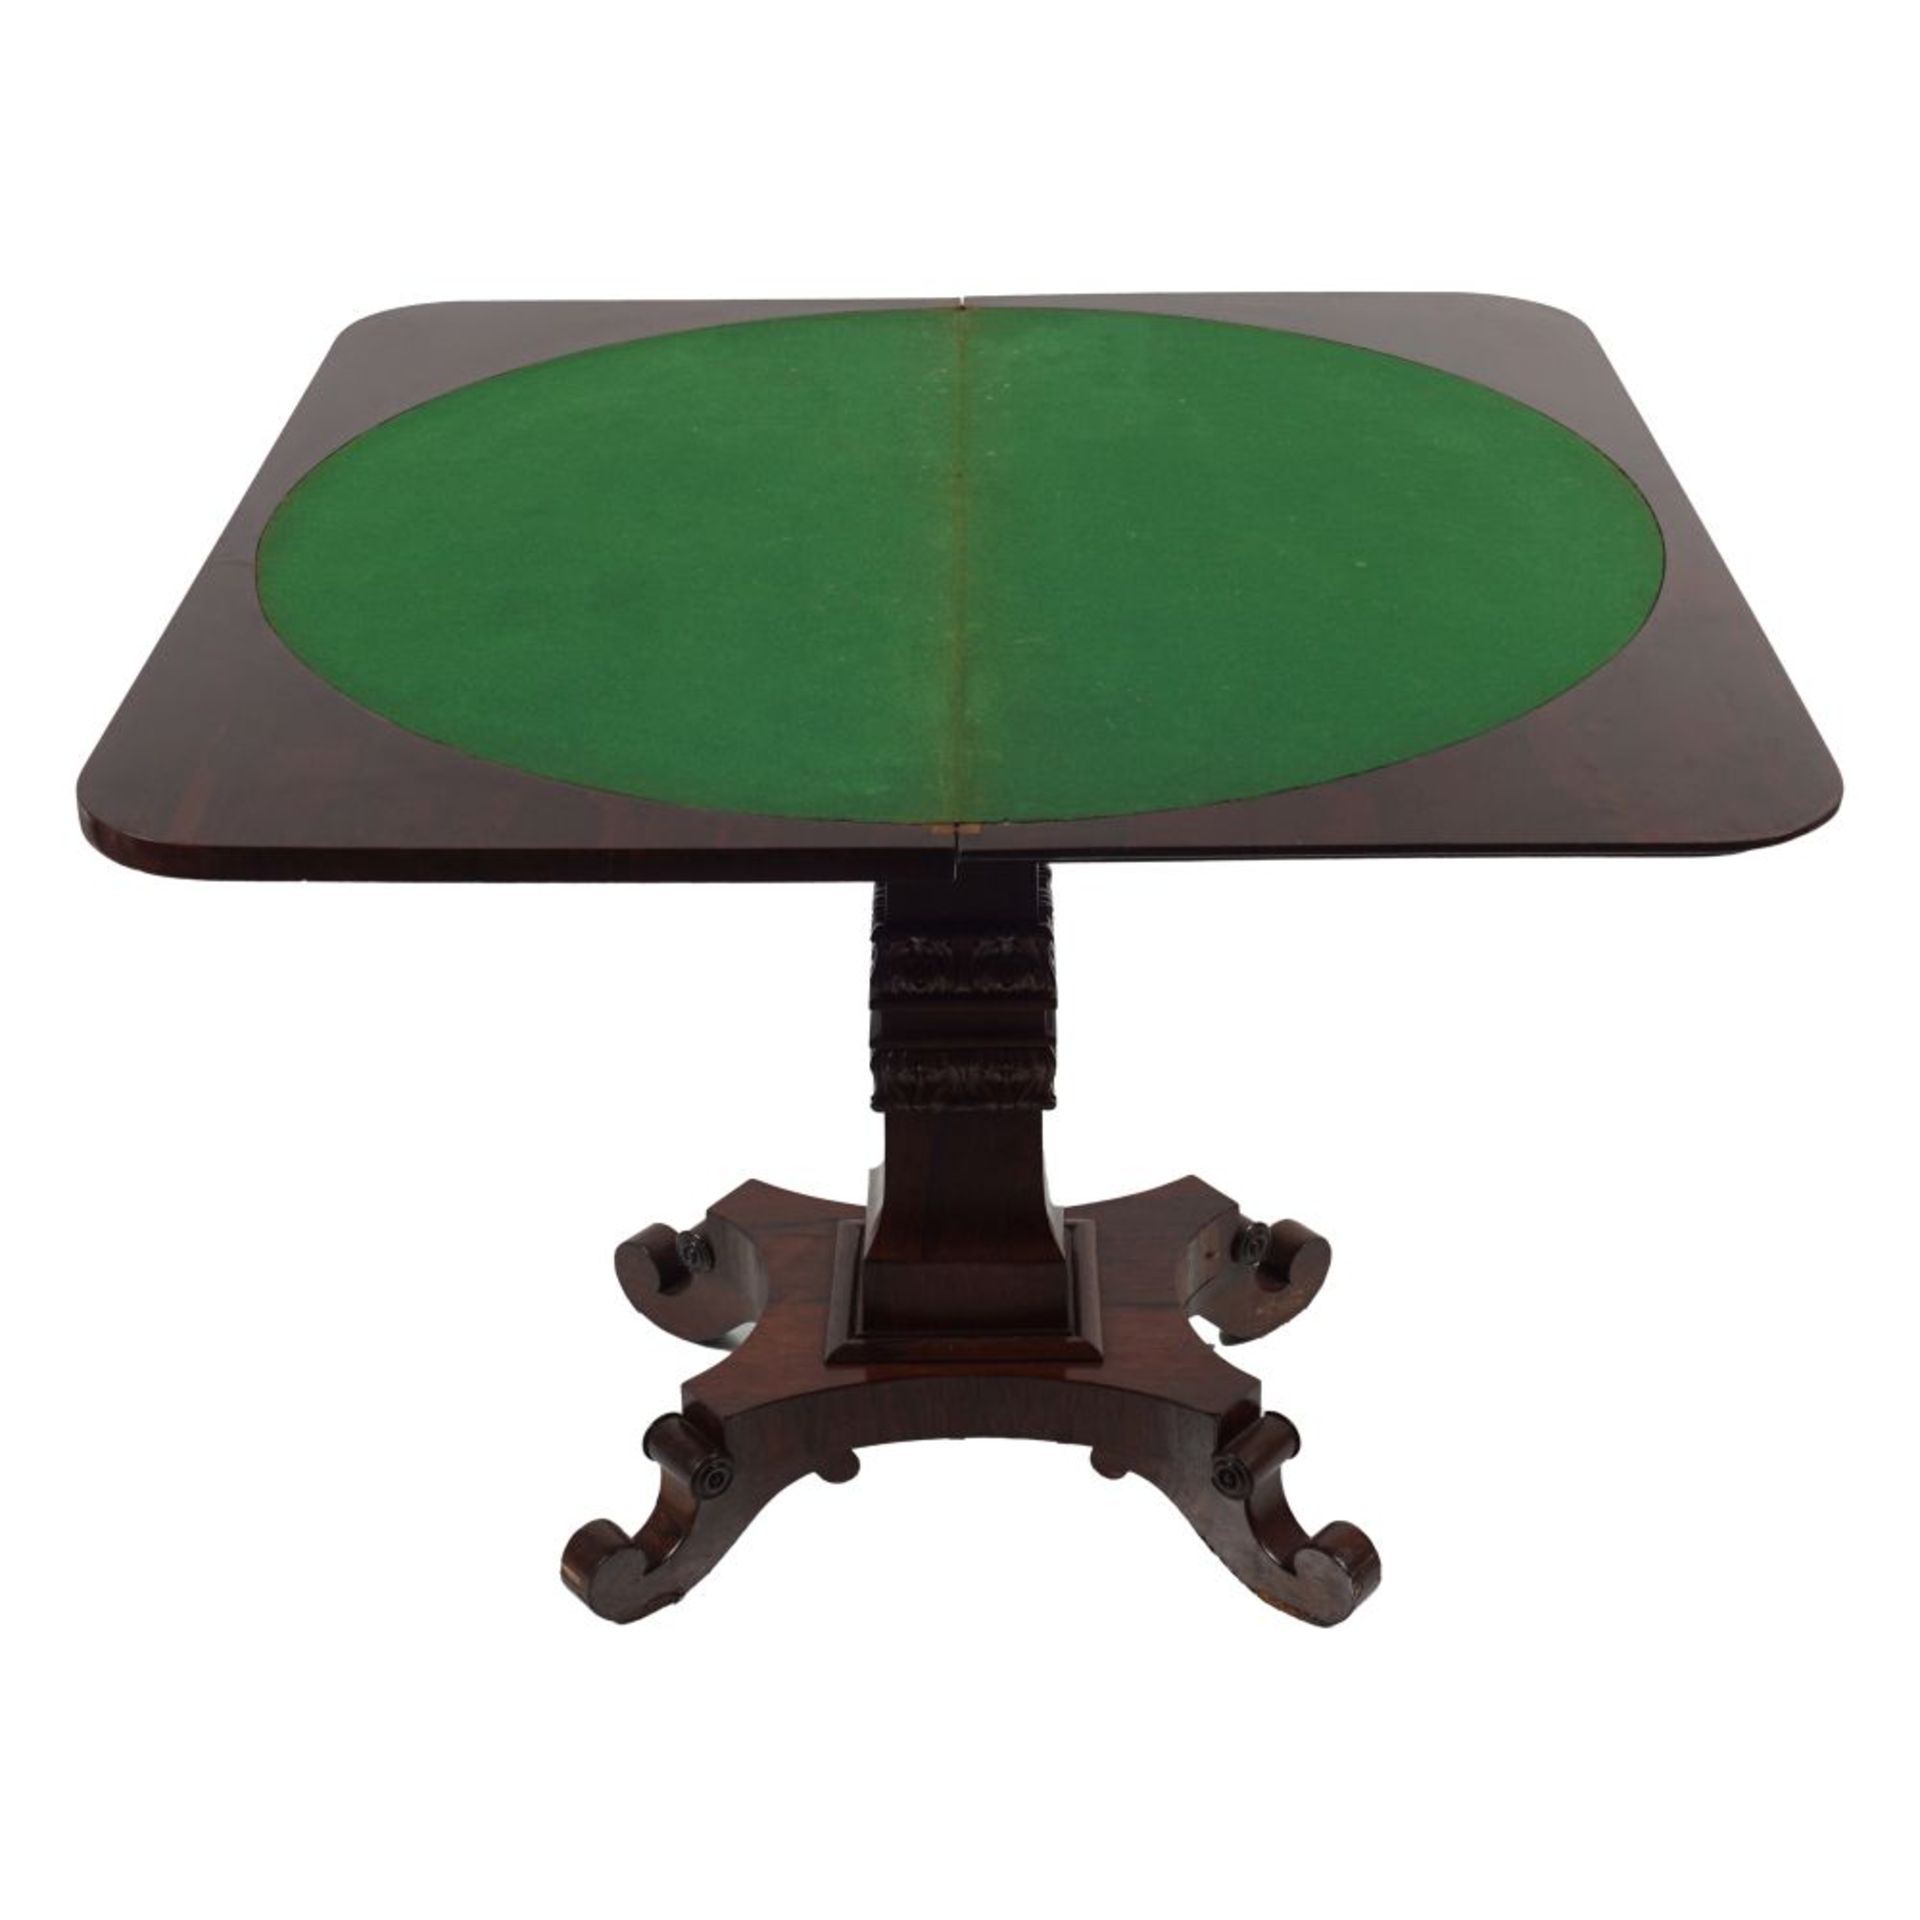 WILLIAM IV ROSEWOOD GAMES TABLE - Image 4 of 4